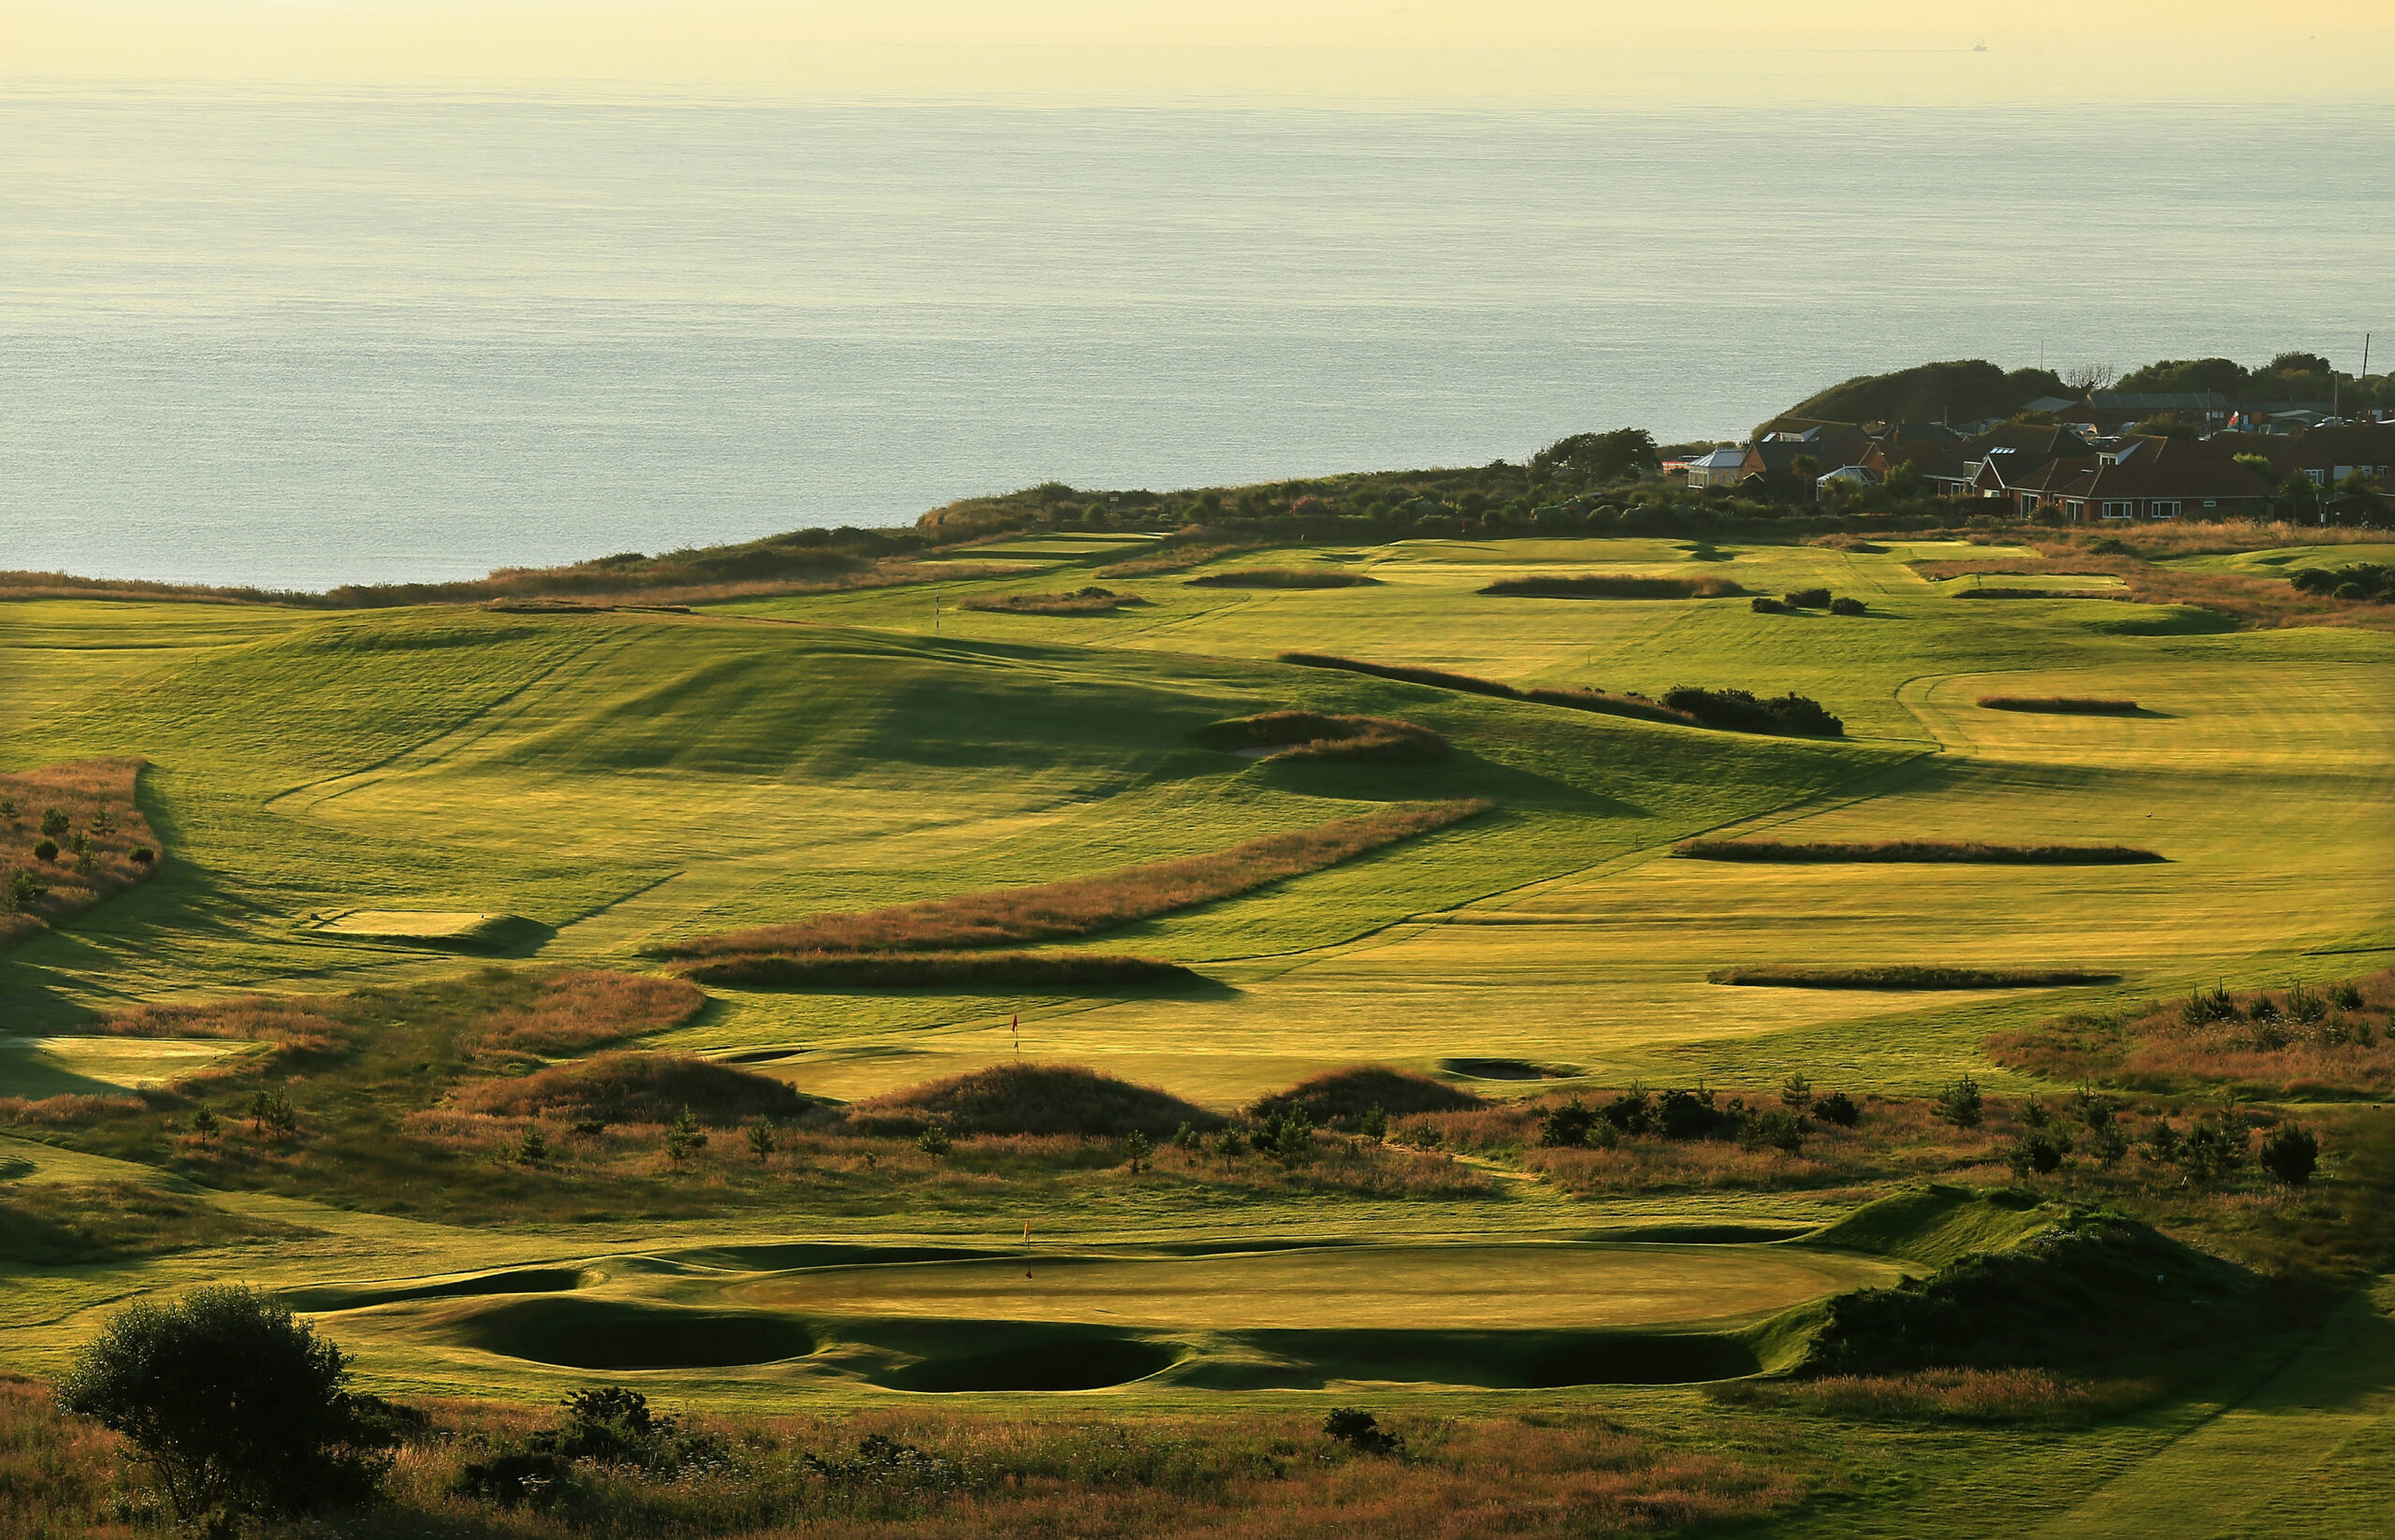 The unforgettable cliff-top course that has a special place in golf history